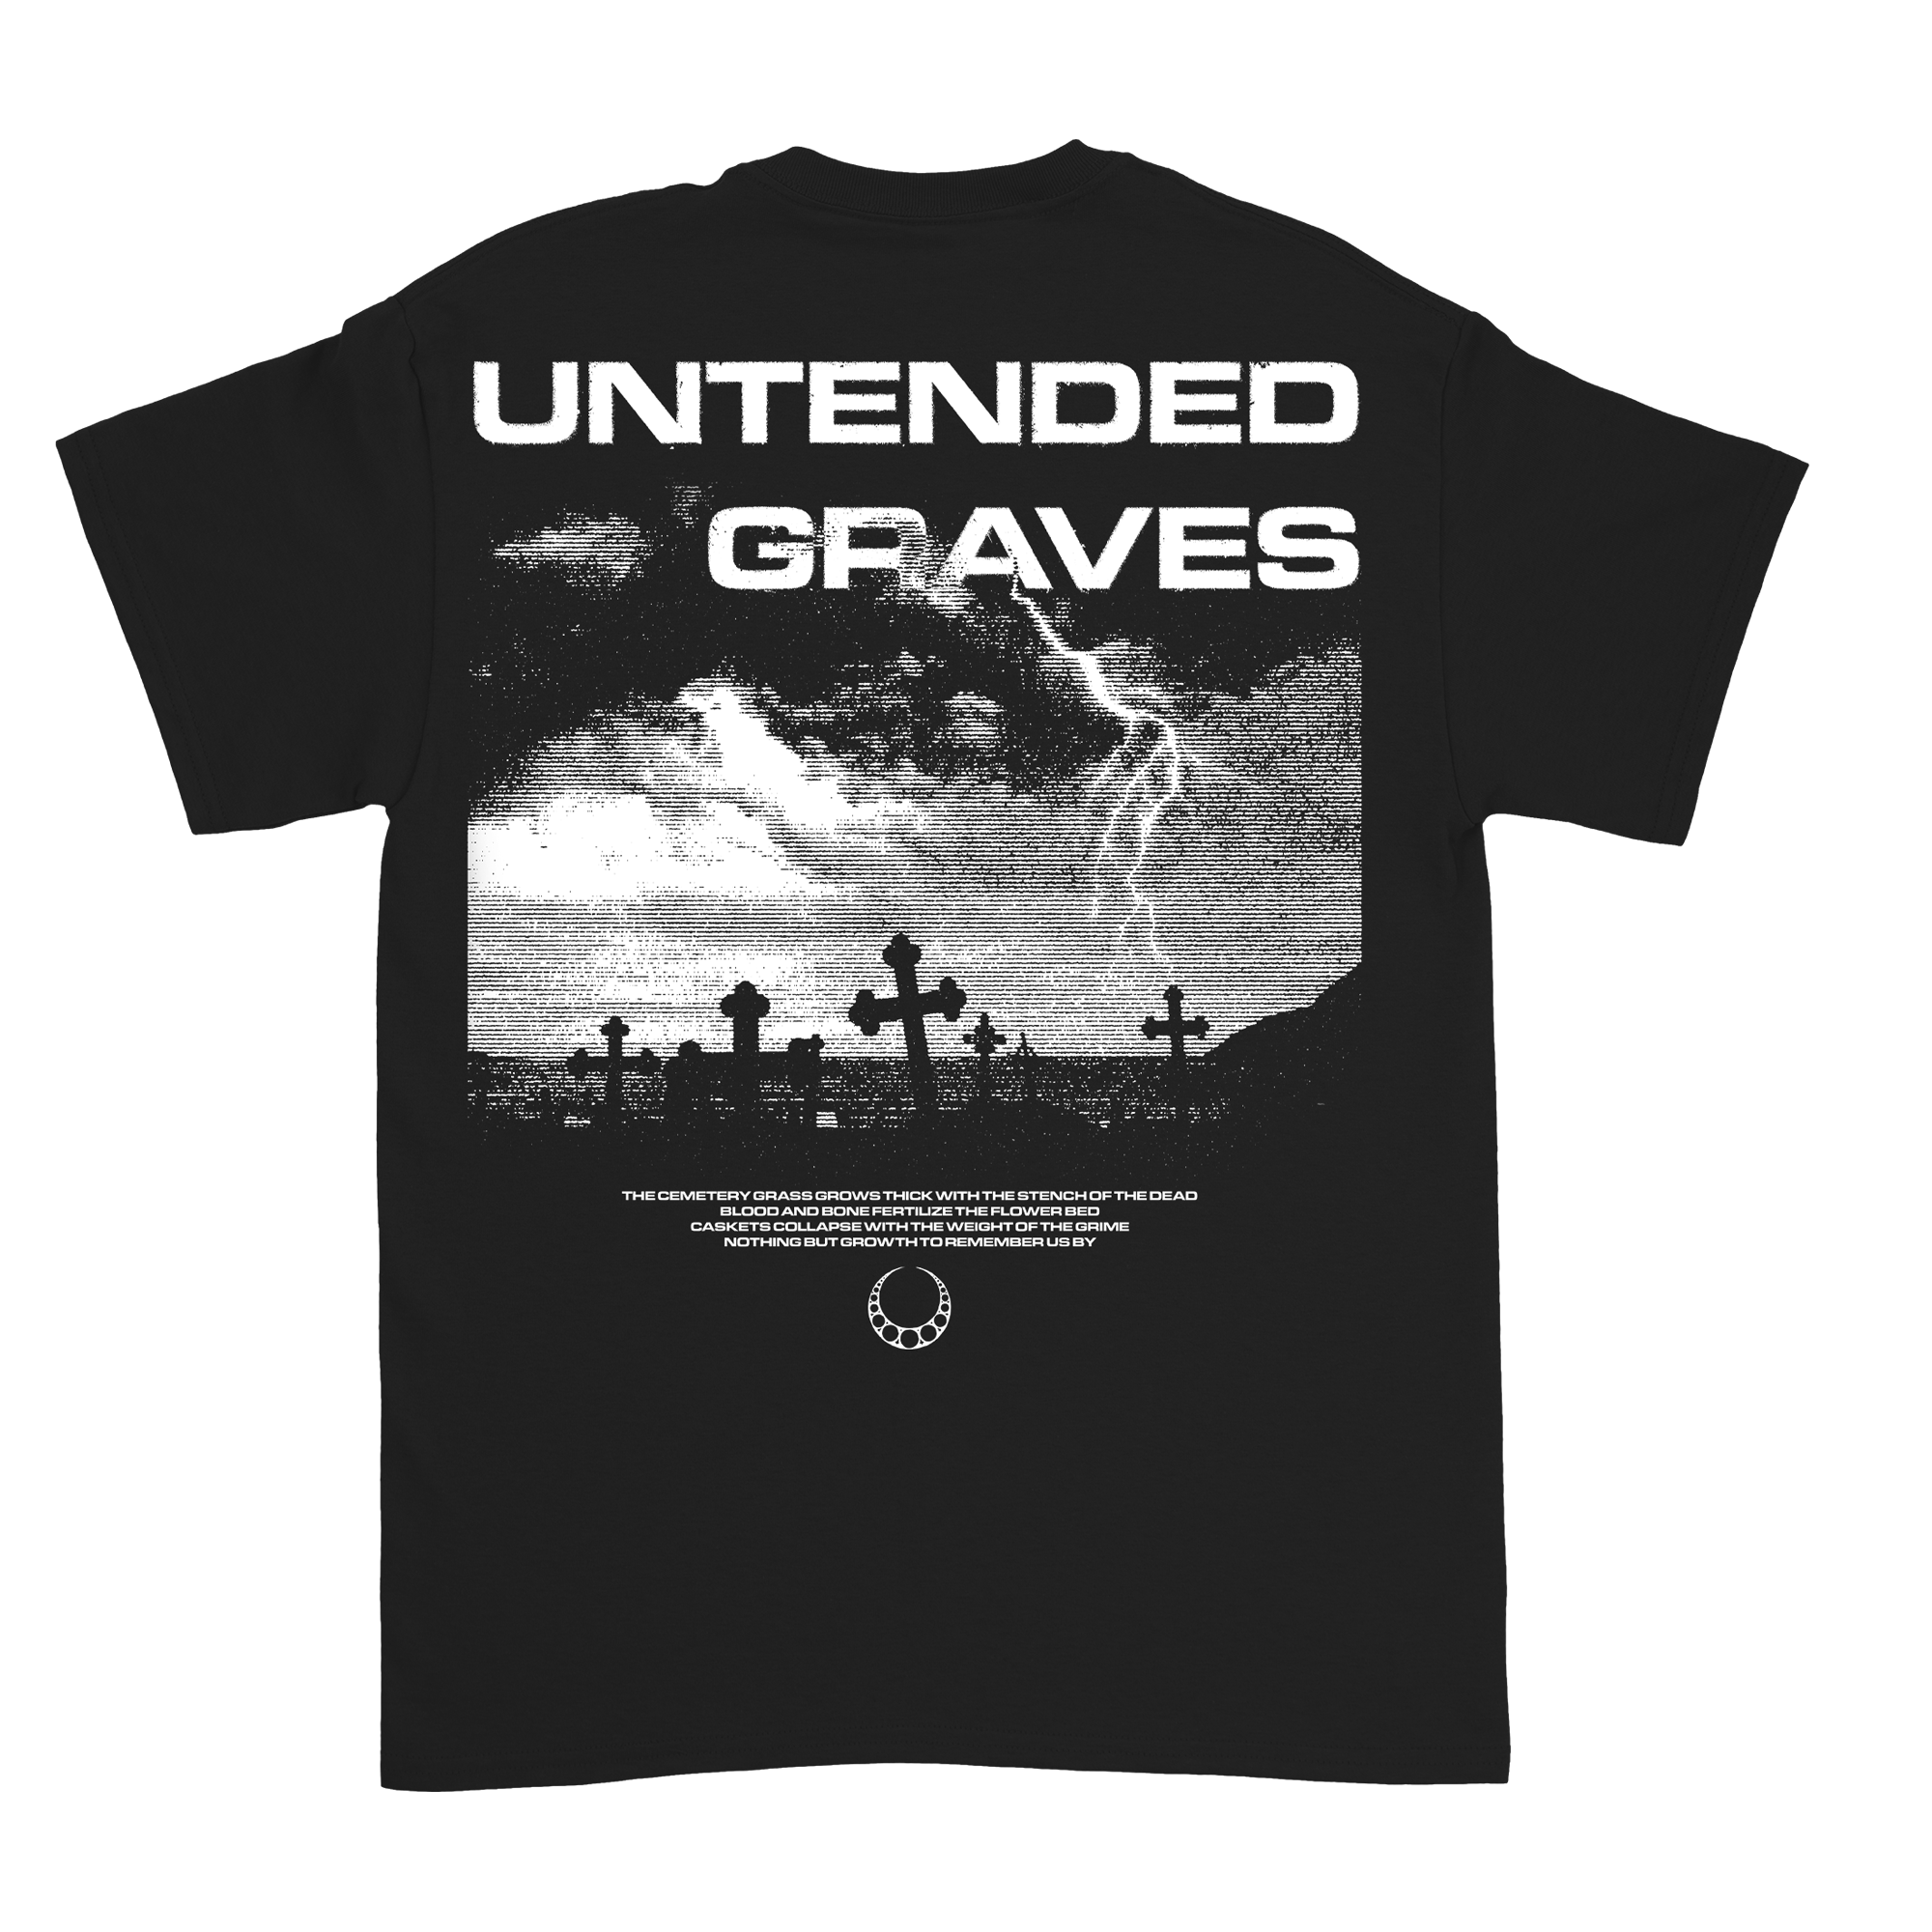 The Acacia Strain - Unintended Graves T-Shirt